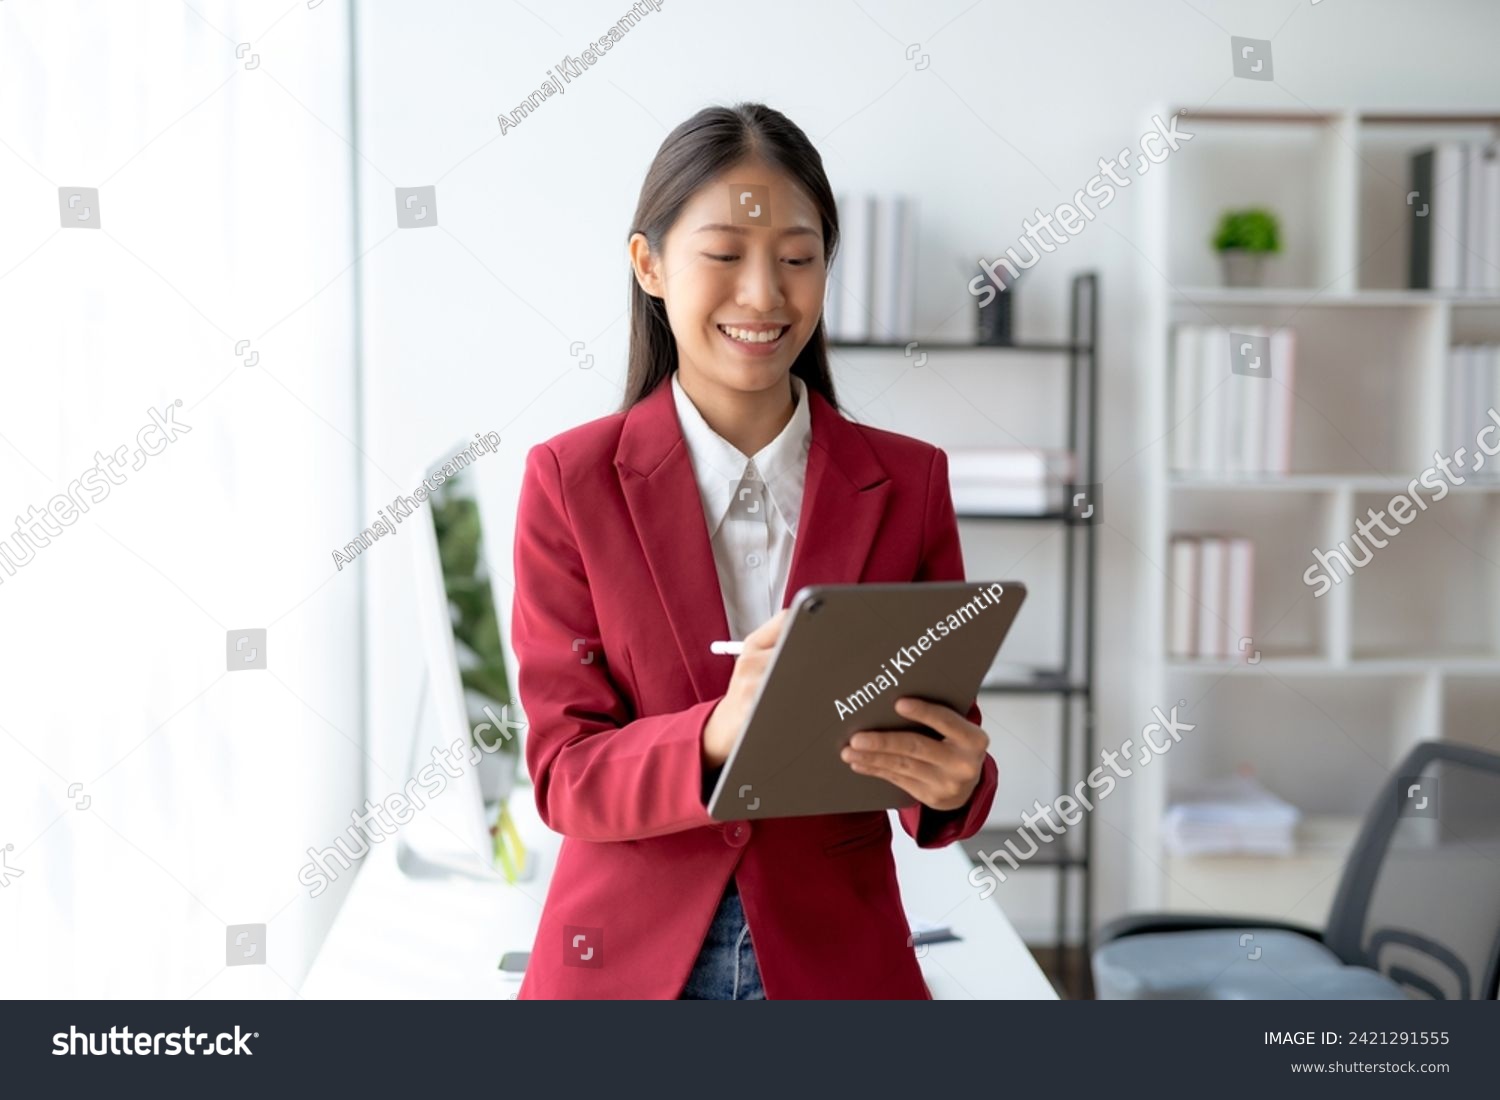 Professional young Asian businesswoman smiling while working on a digital tablet in a modern office setting. #2421291555